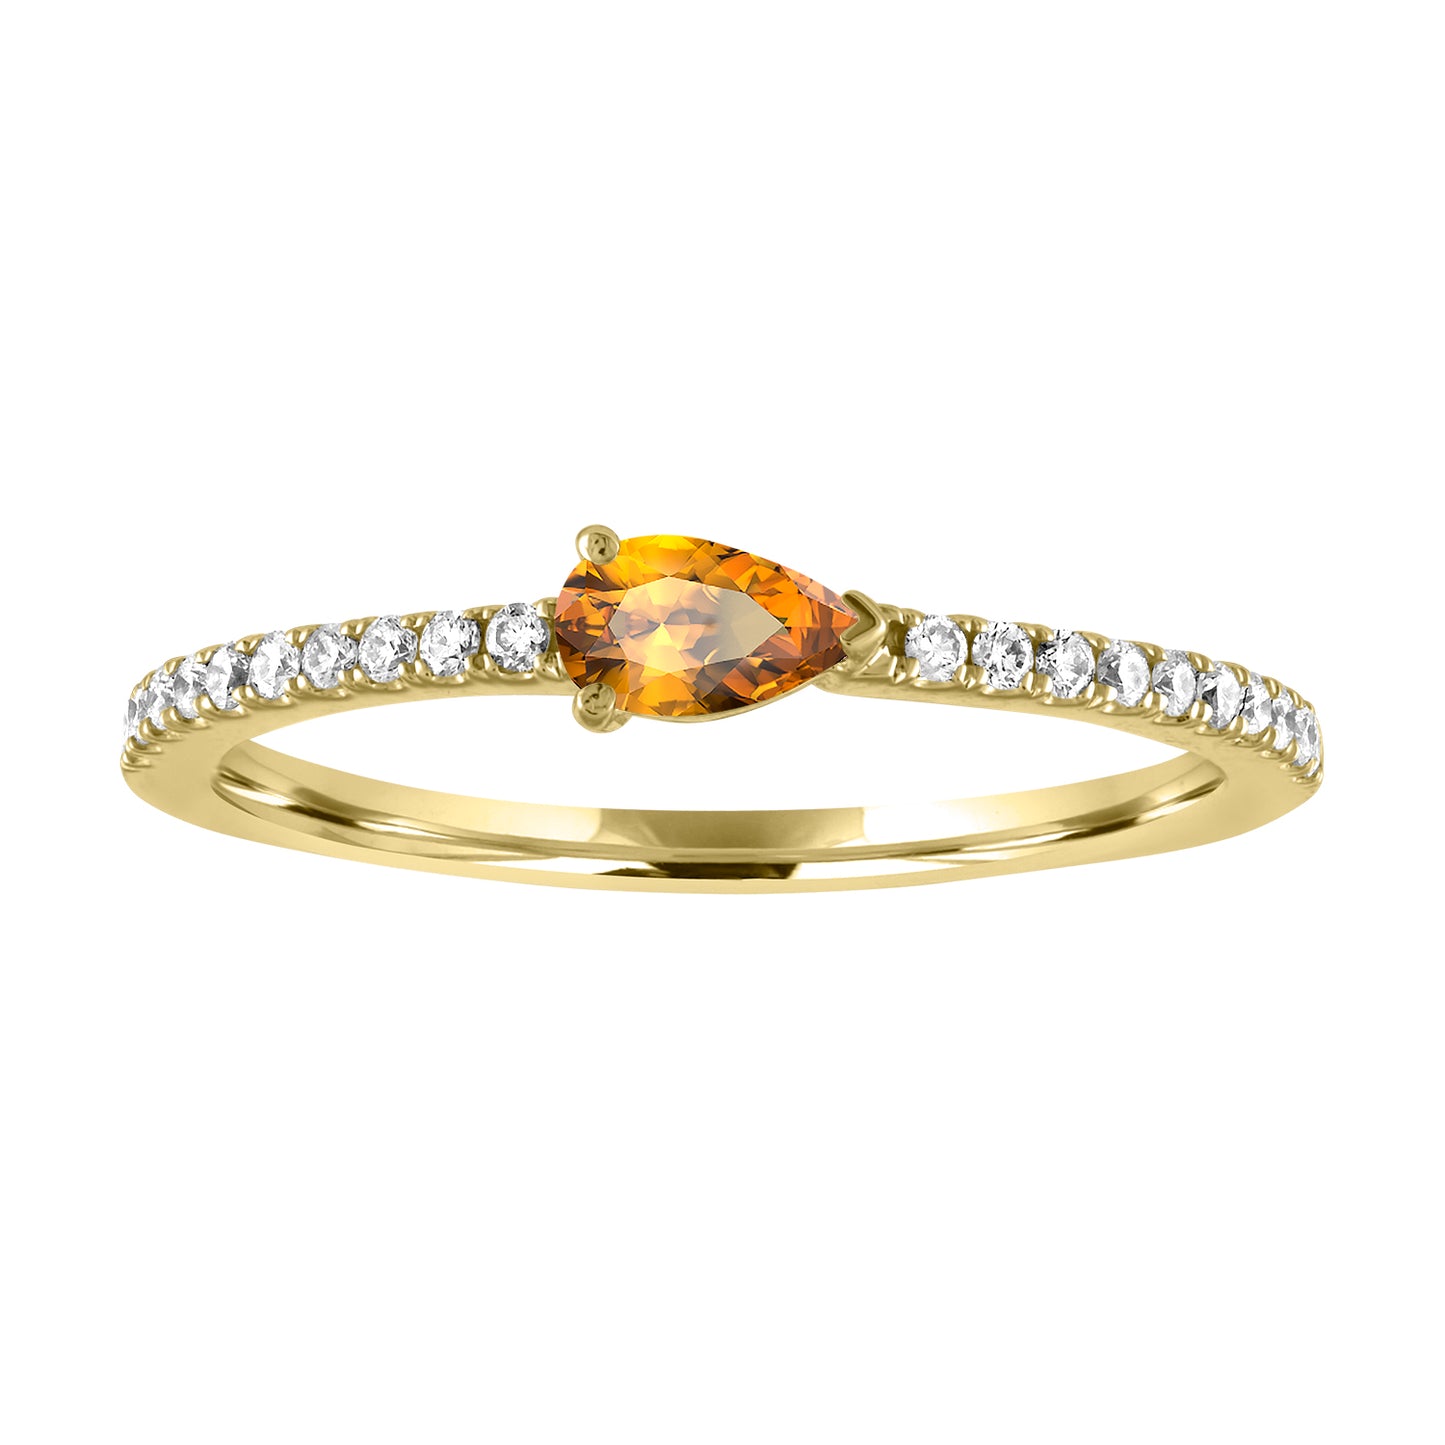 Yellow gold skinny band with a pear shaped citrine in the center and round diamonds on the shank. 